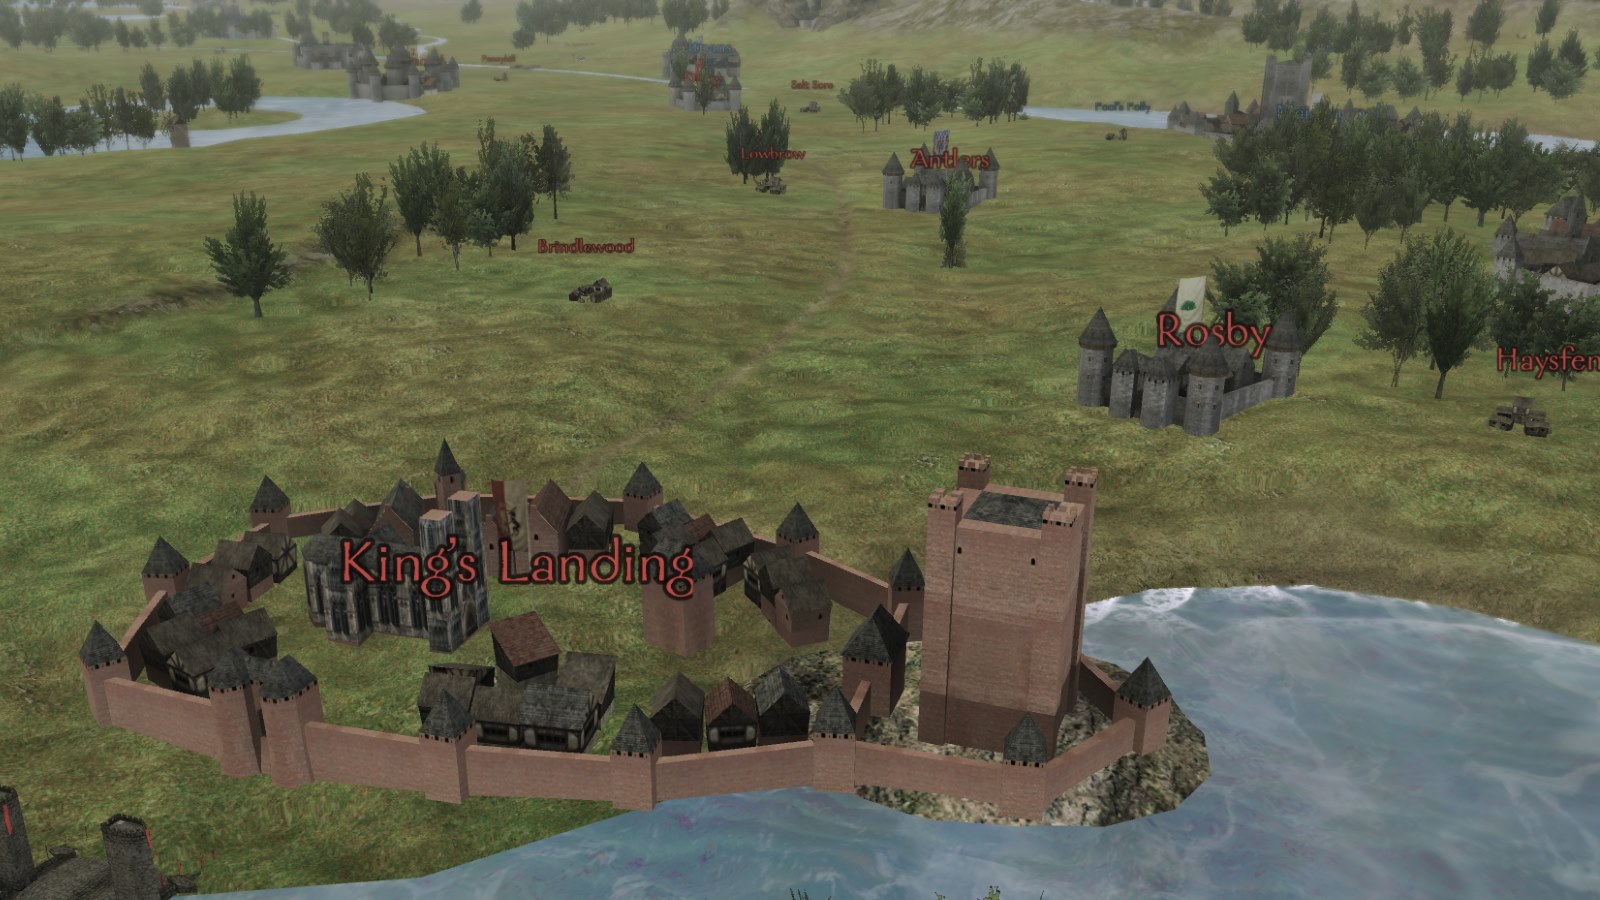 mount and blade with fire and sword map